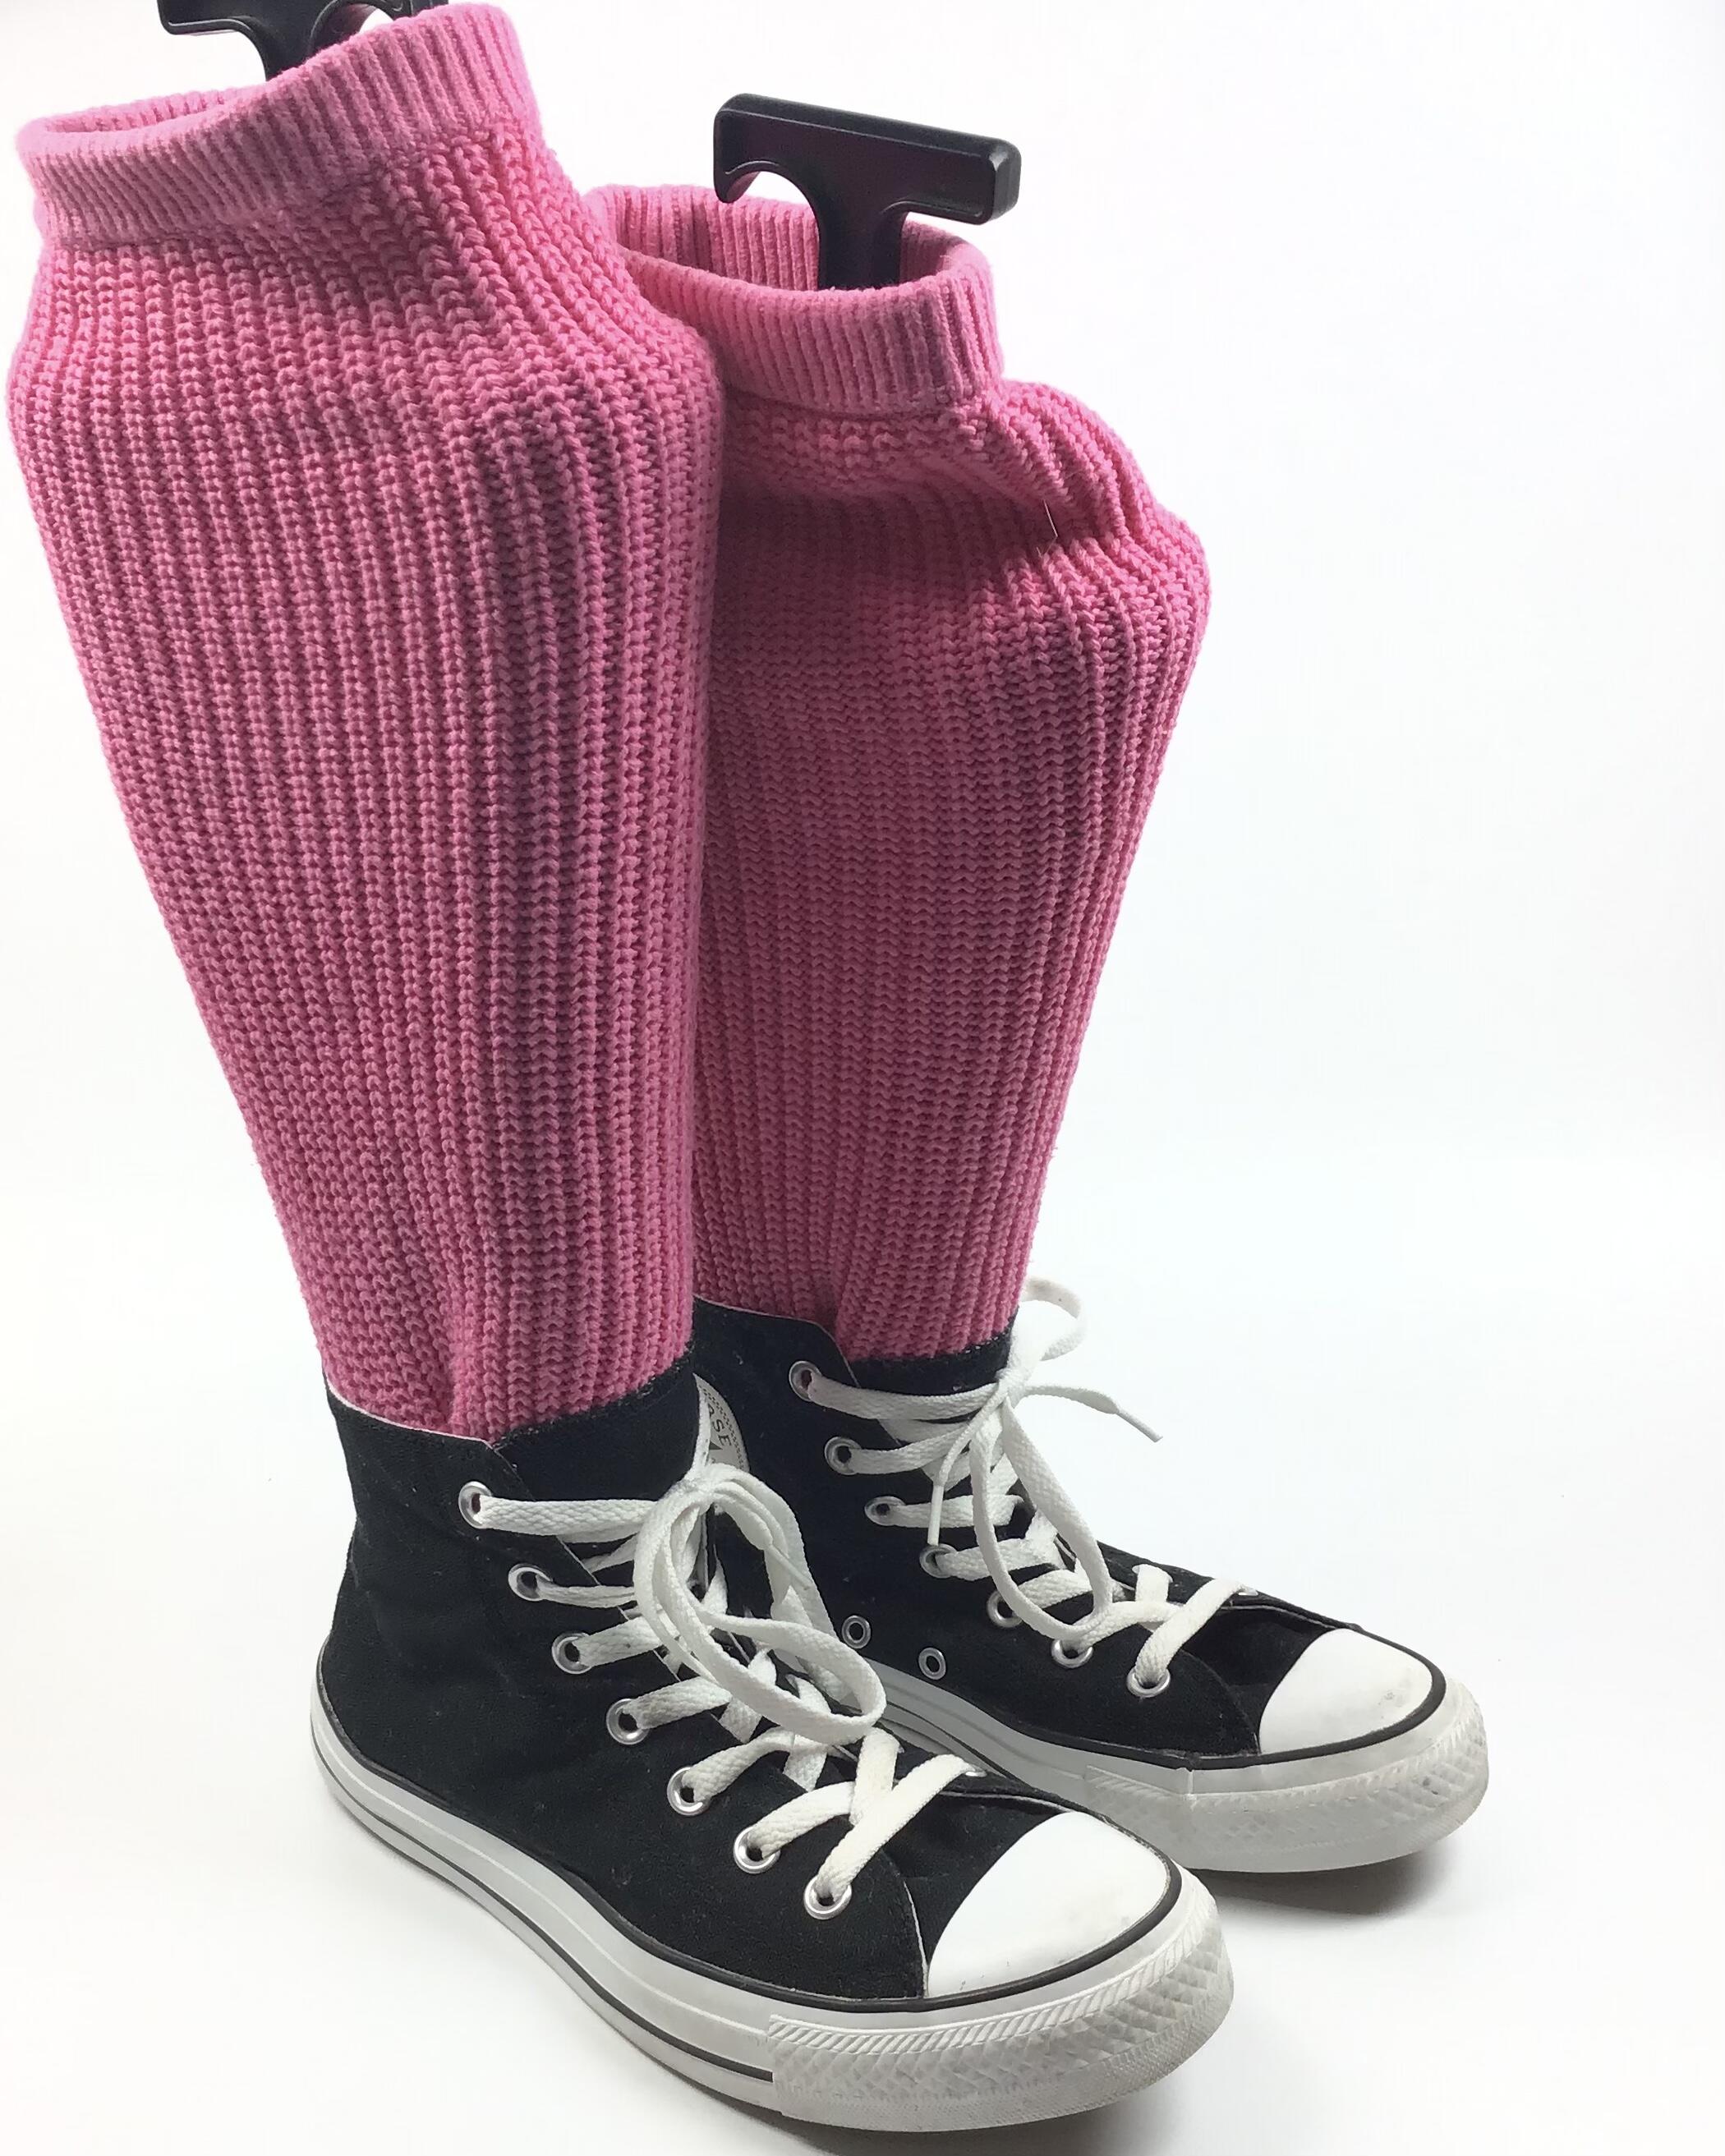 Converse high tops with leg warmers